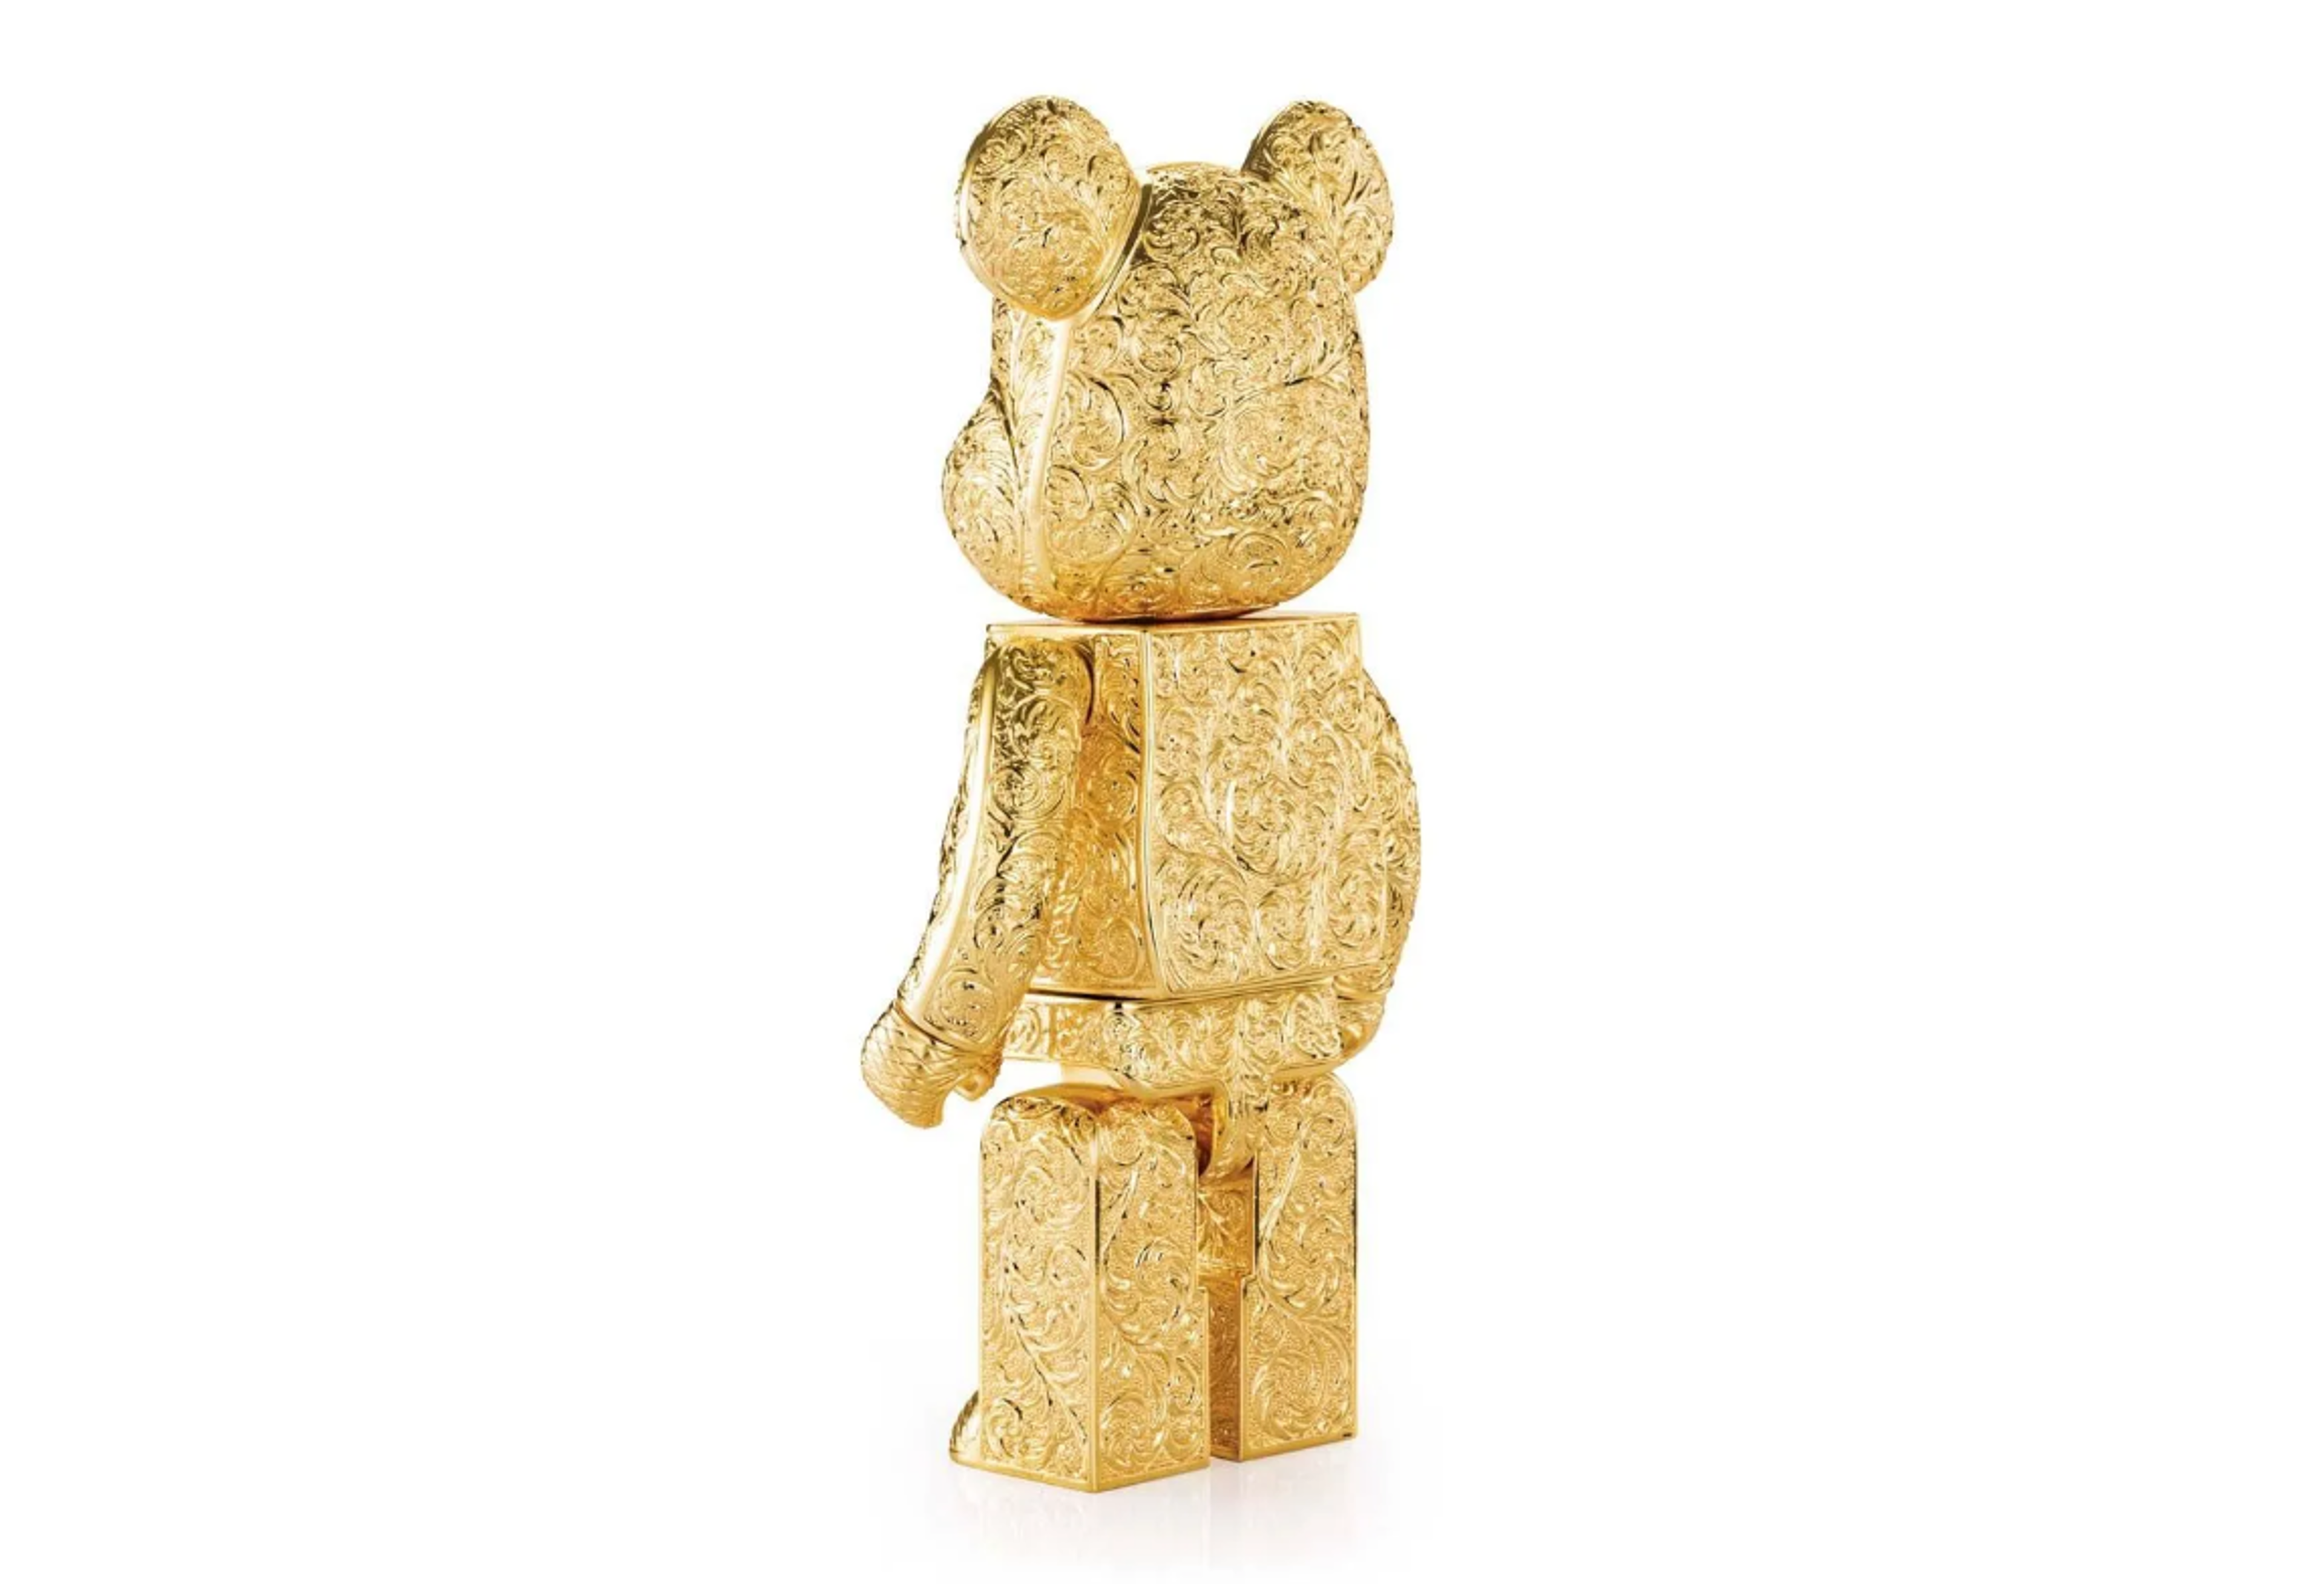 Alternate View 1 of Special Edition Arabesque Golden BE@RBRICK ROYAL SELANGOR